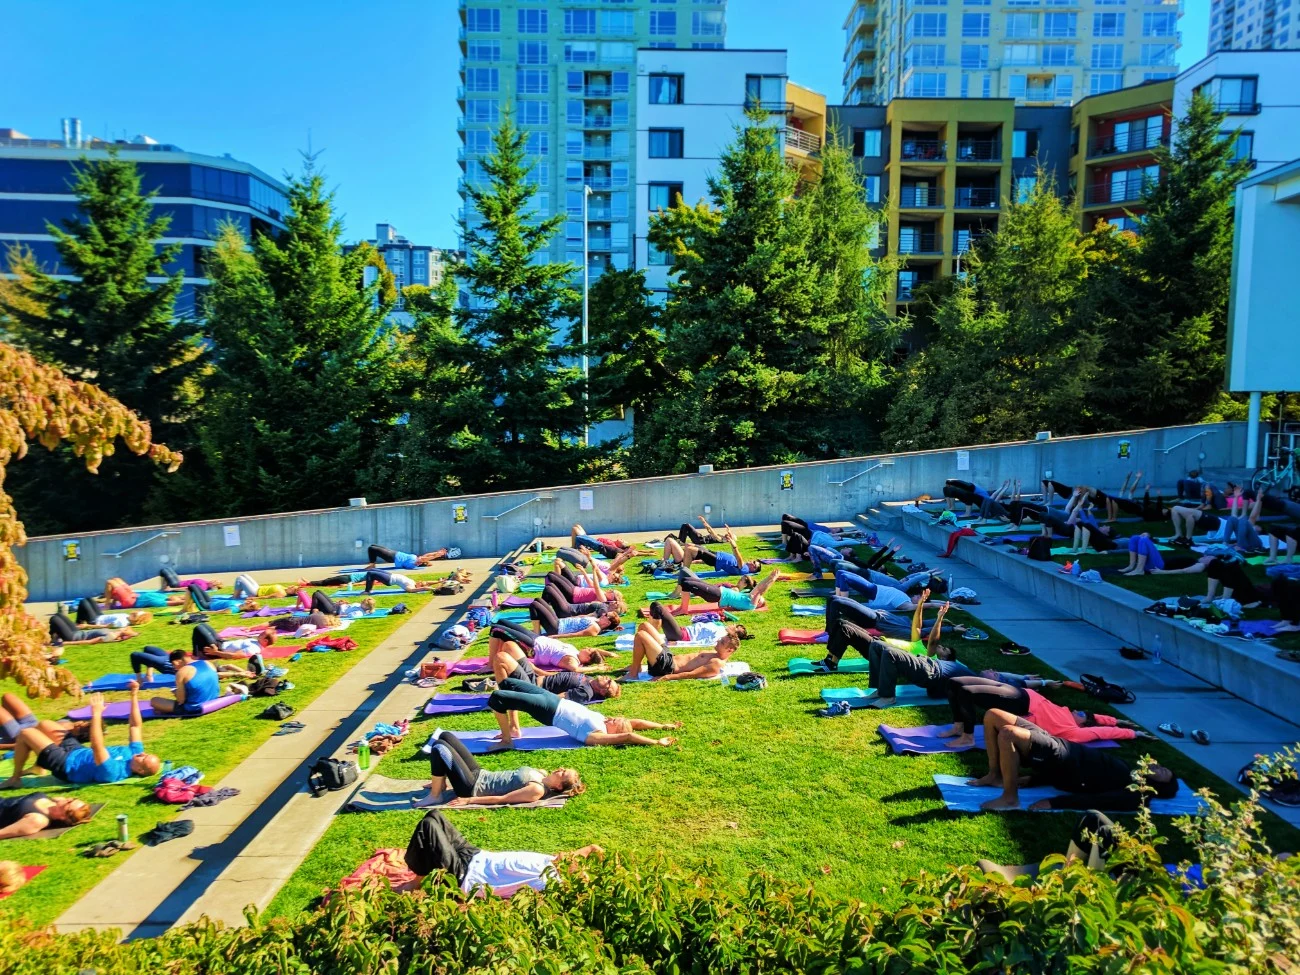 Public outdoor yoga at Olympic Sculpture Park Seattle 1